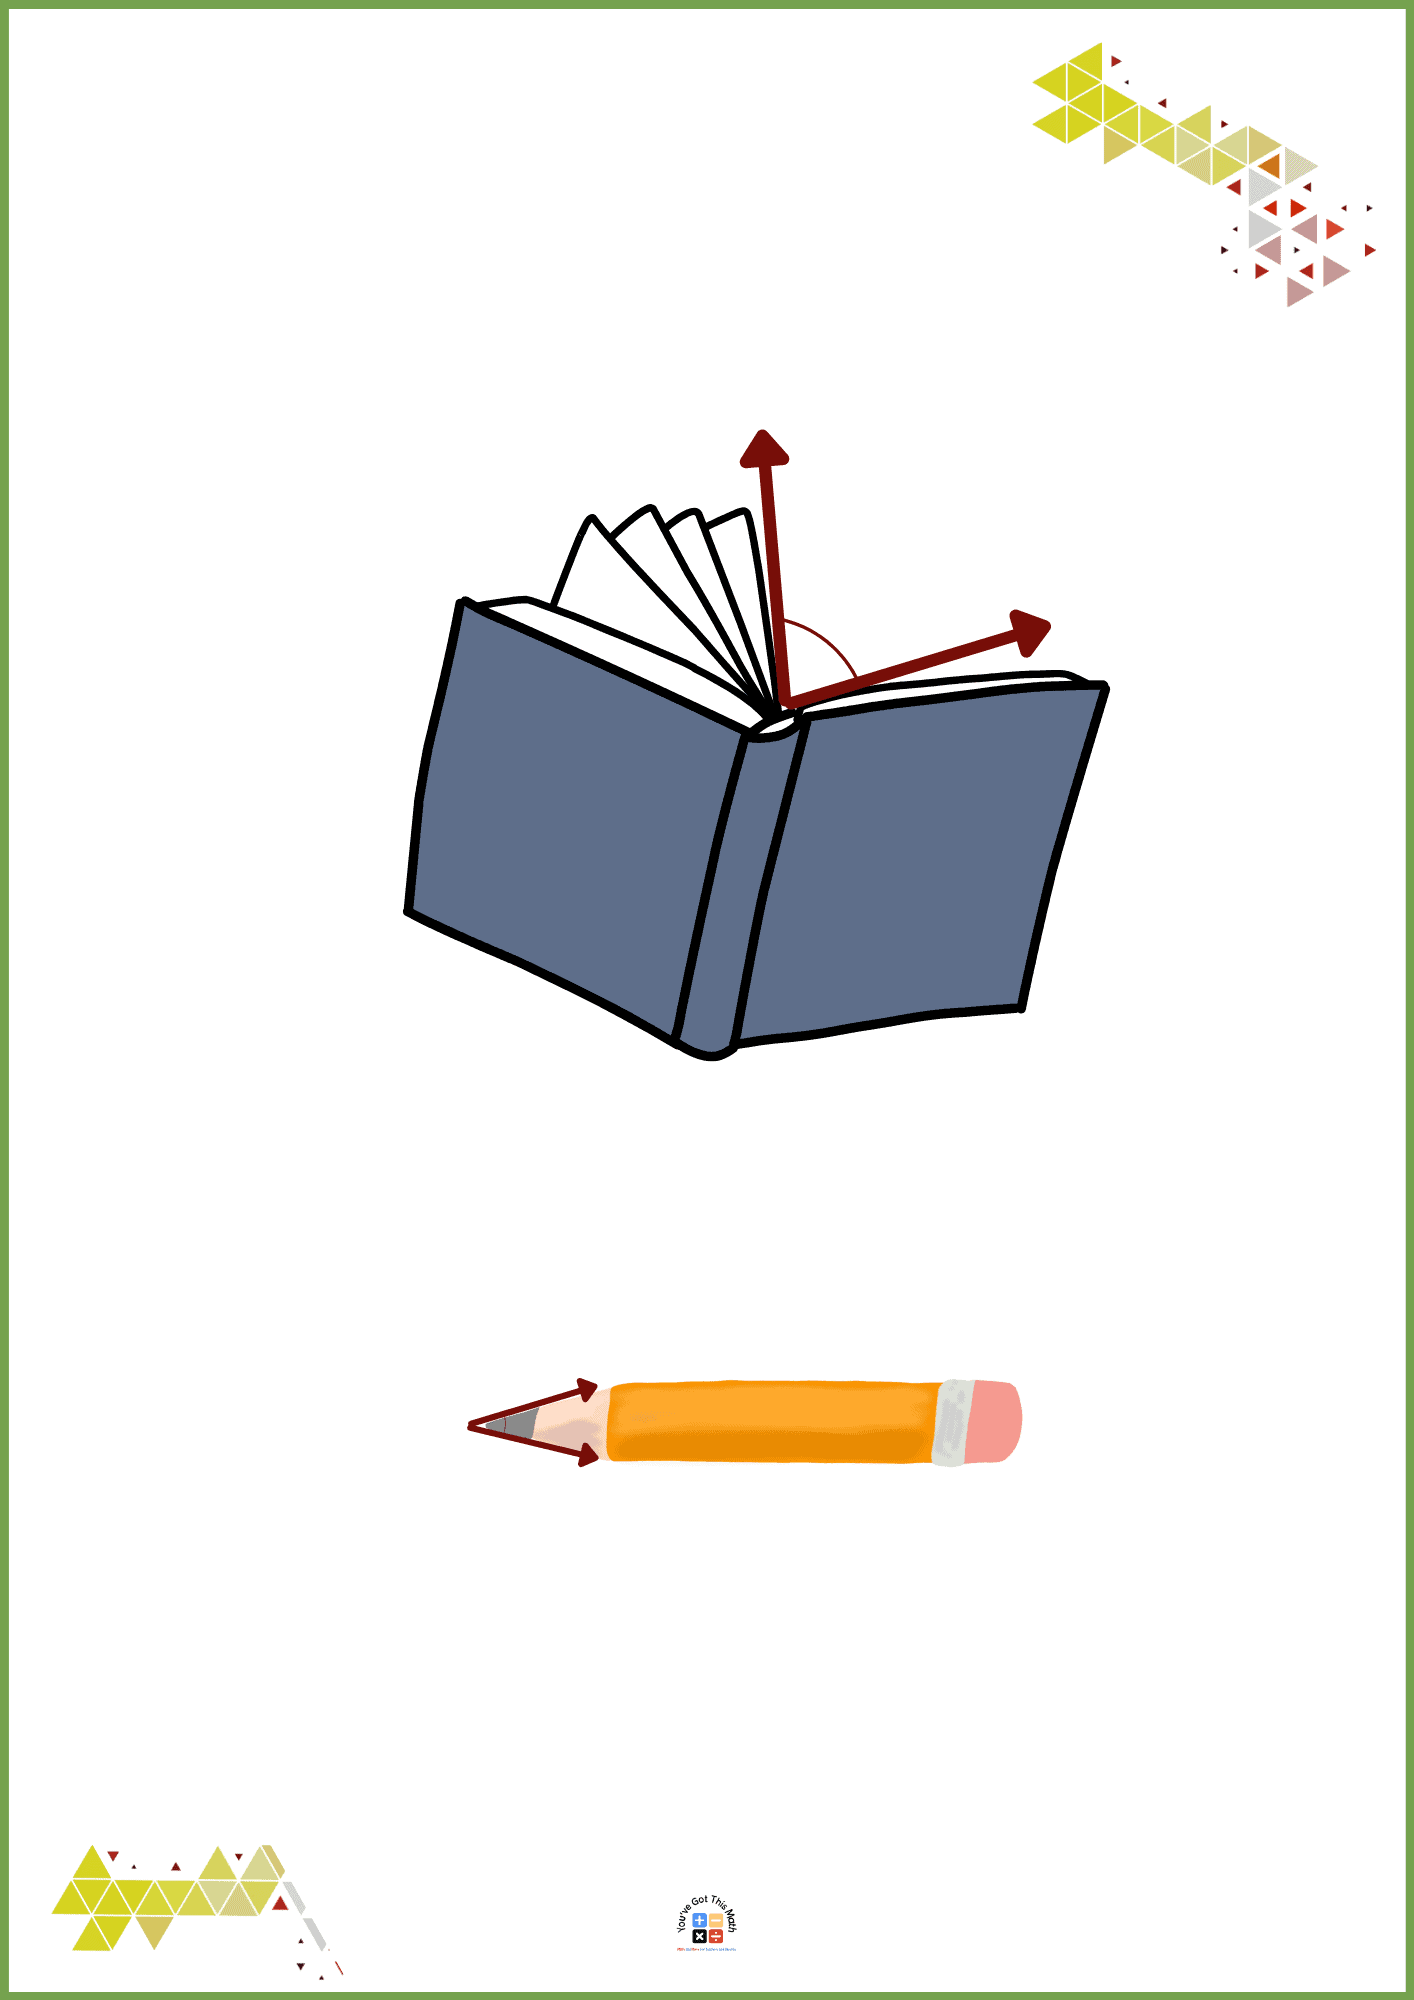 Books and Pencil Tips in Acute Angle Shape